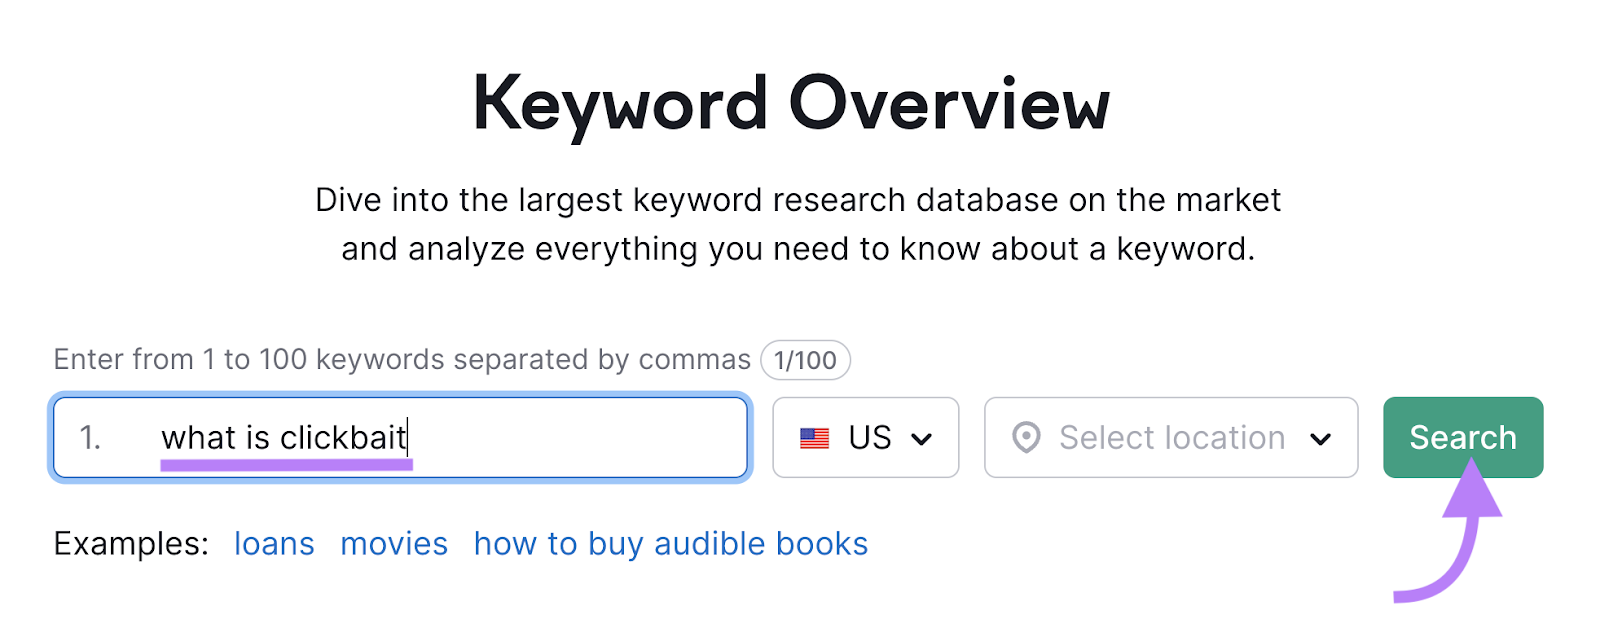 Searching for "what is clickbait" in Keyword Overview tool